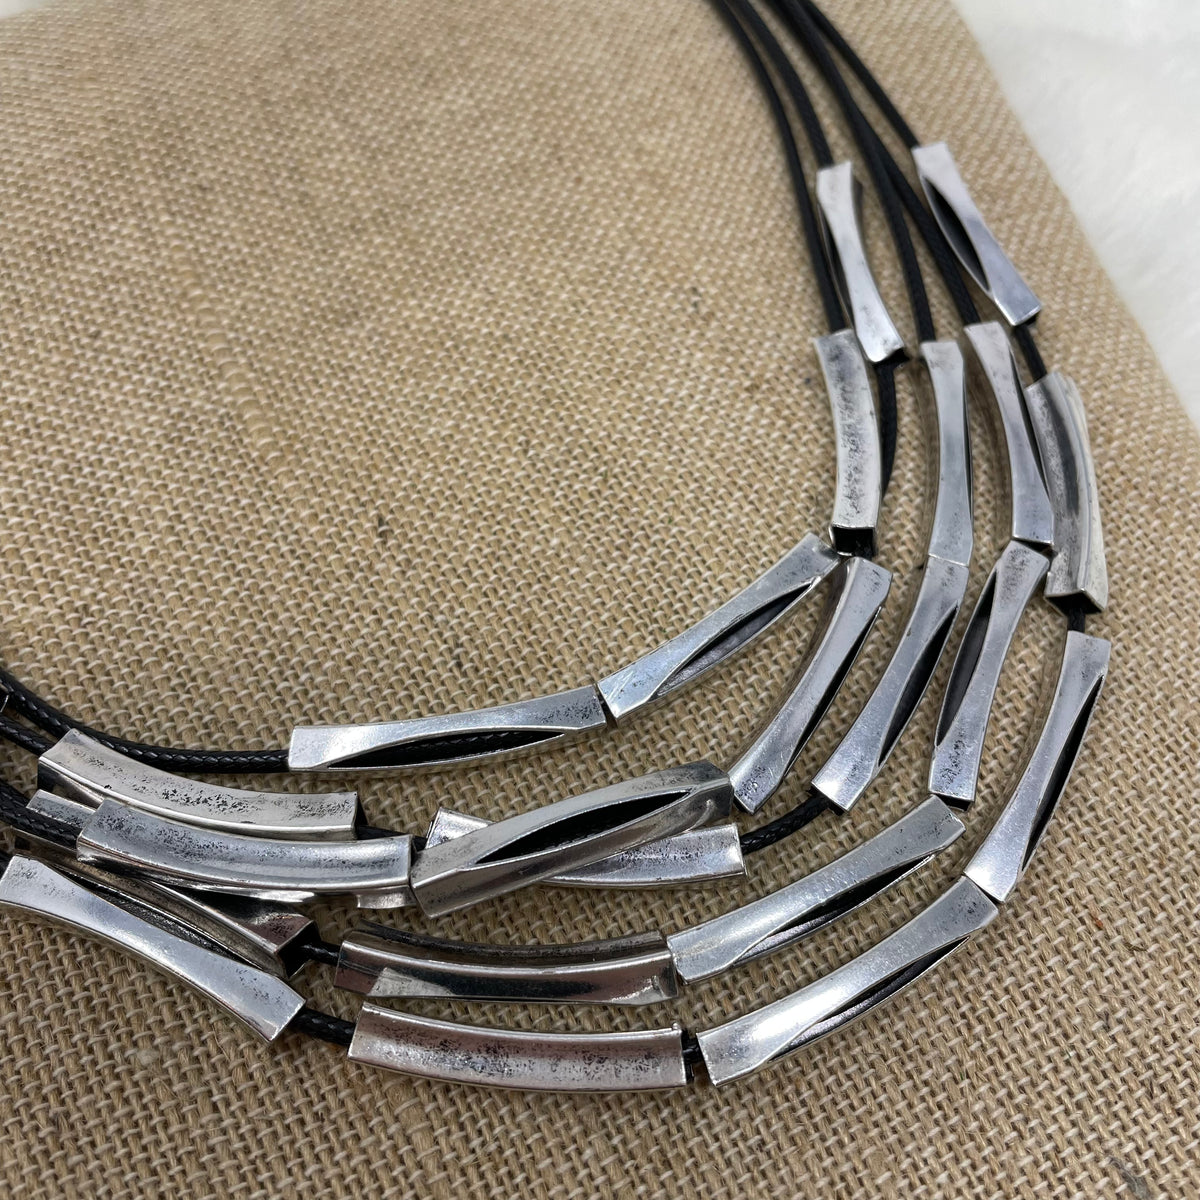 4 Strand Cord Necklace w/ Metal Rectangles